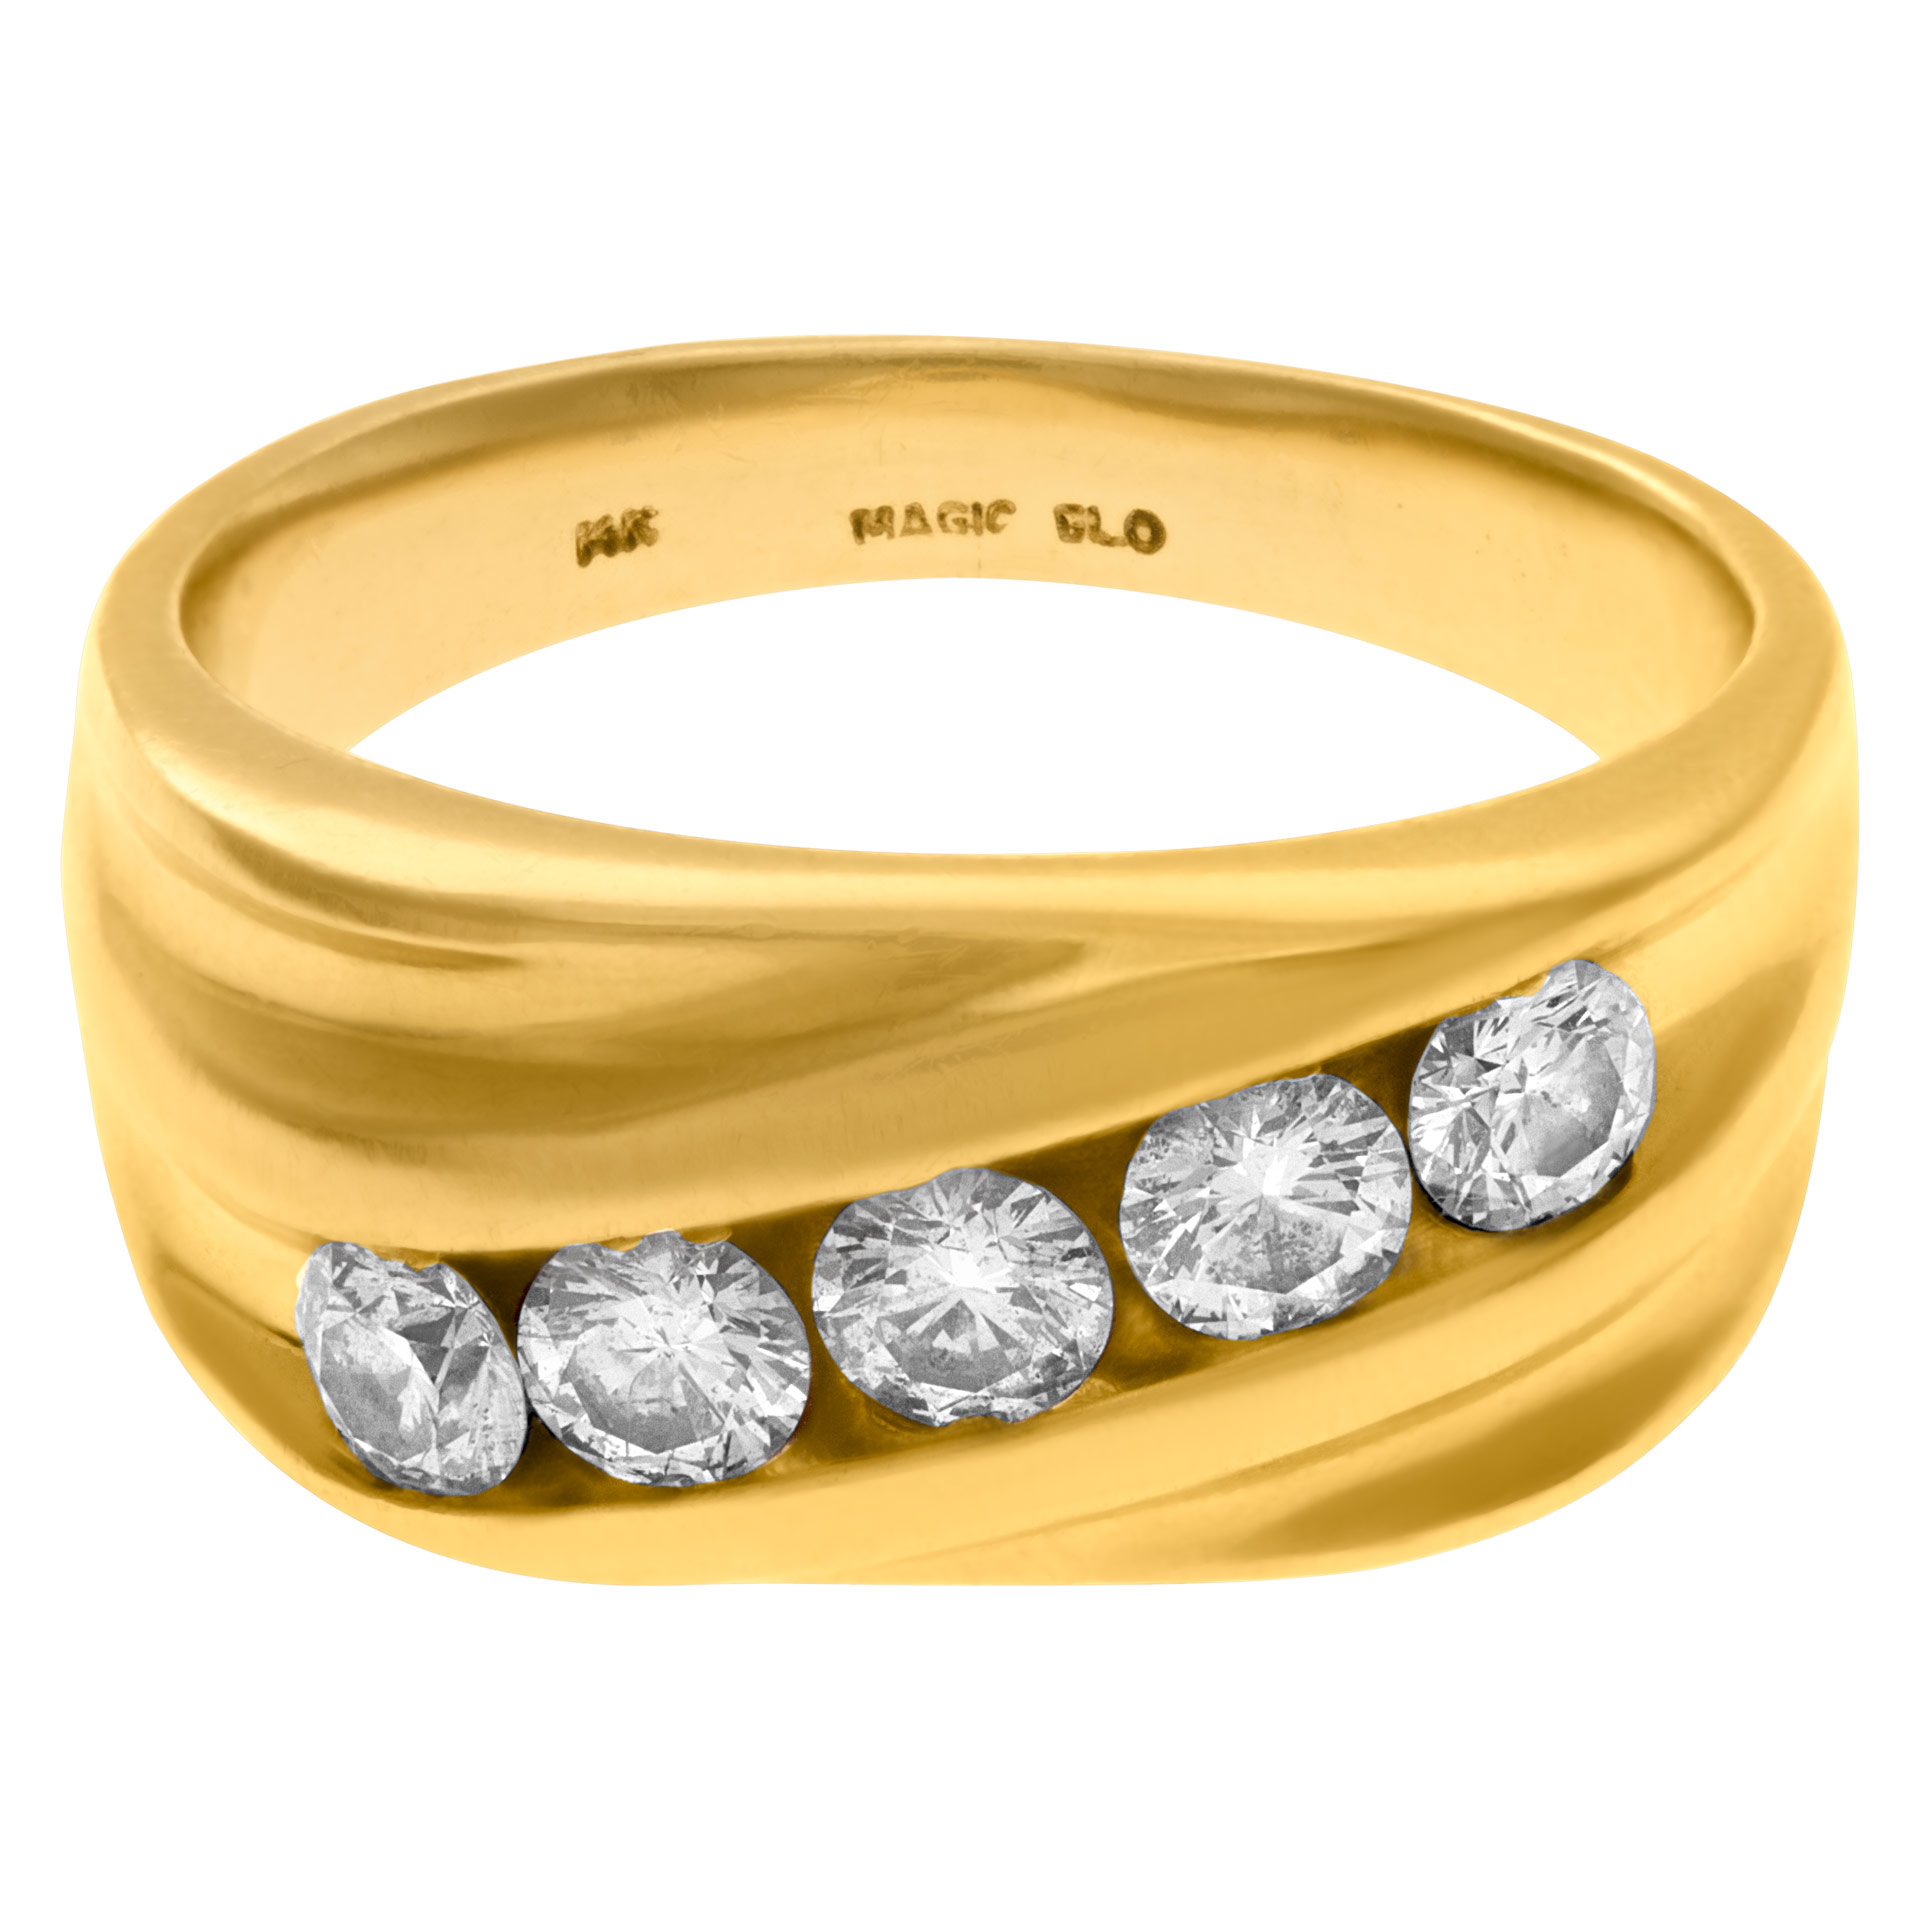 Striking diamond band in 14k yellow gold with 5 diamonds approximately 1.25 carats